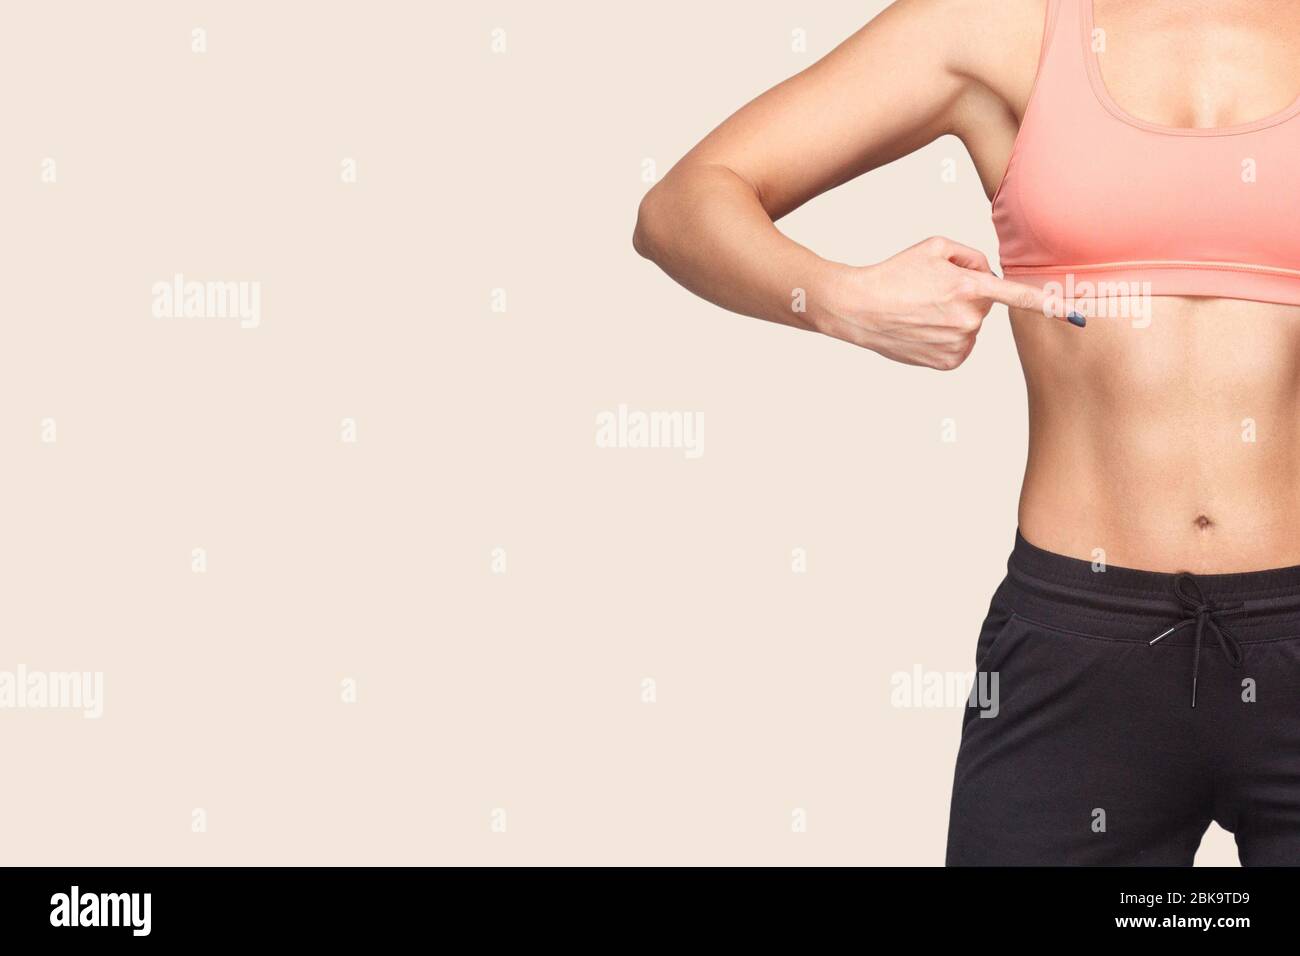 Slim and fit female athletic body stock photo containing fitness and